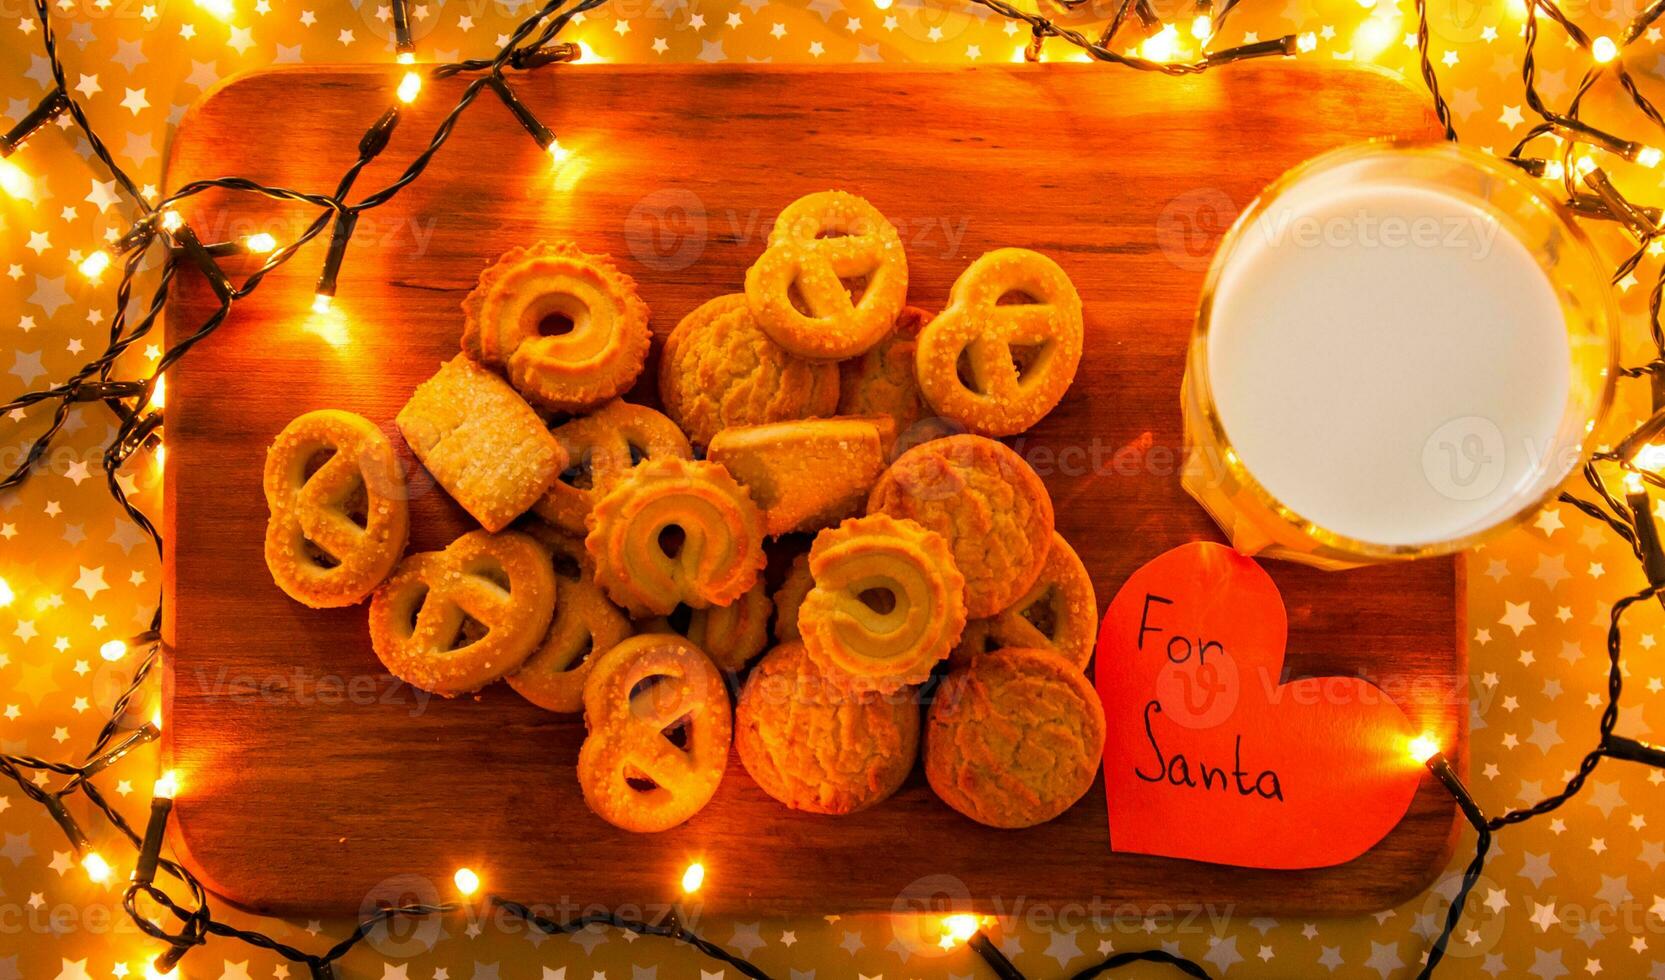 Wooden board with yellow cookies, glass of milk, paper heart For Santa and surrounded with Christmas lights photo